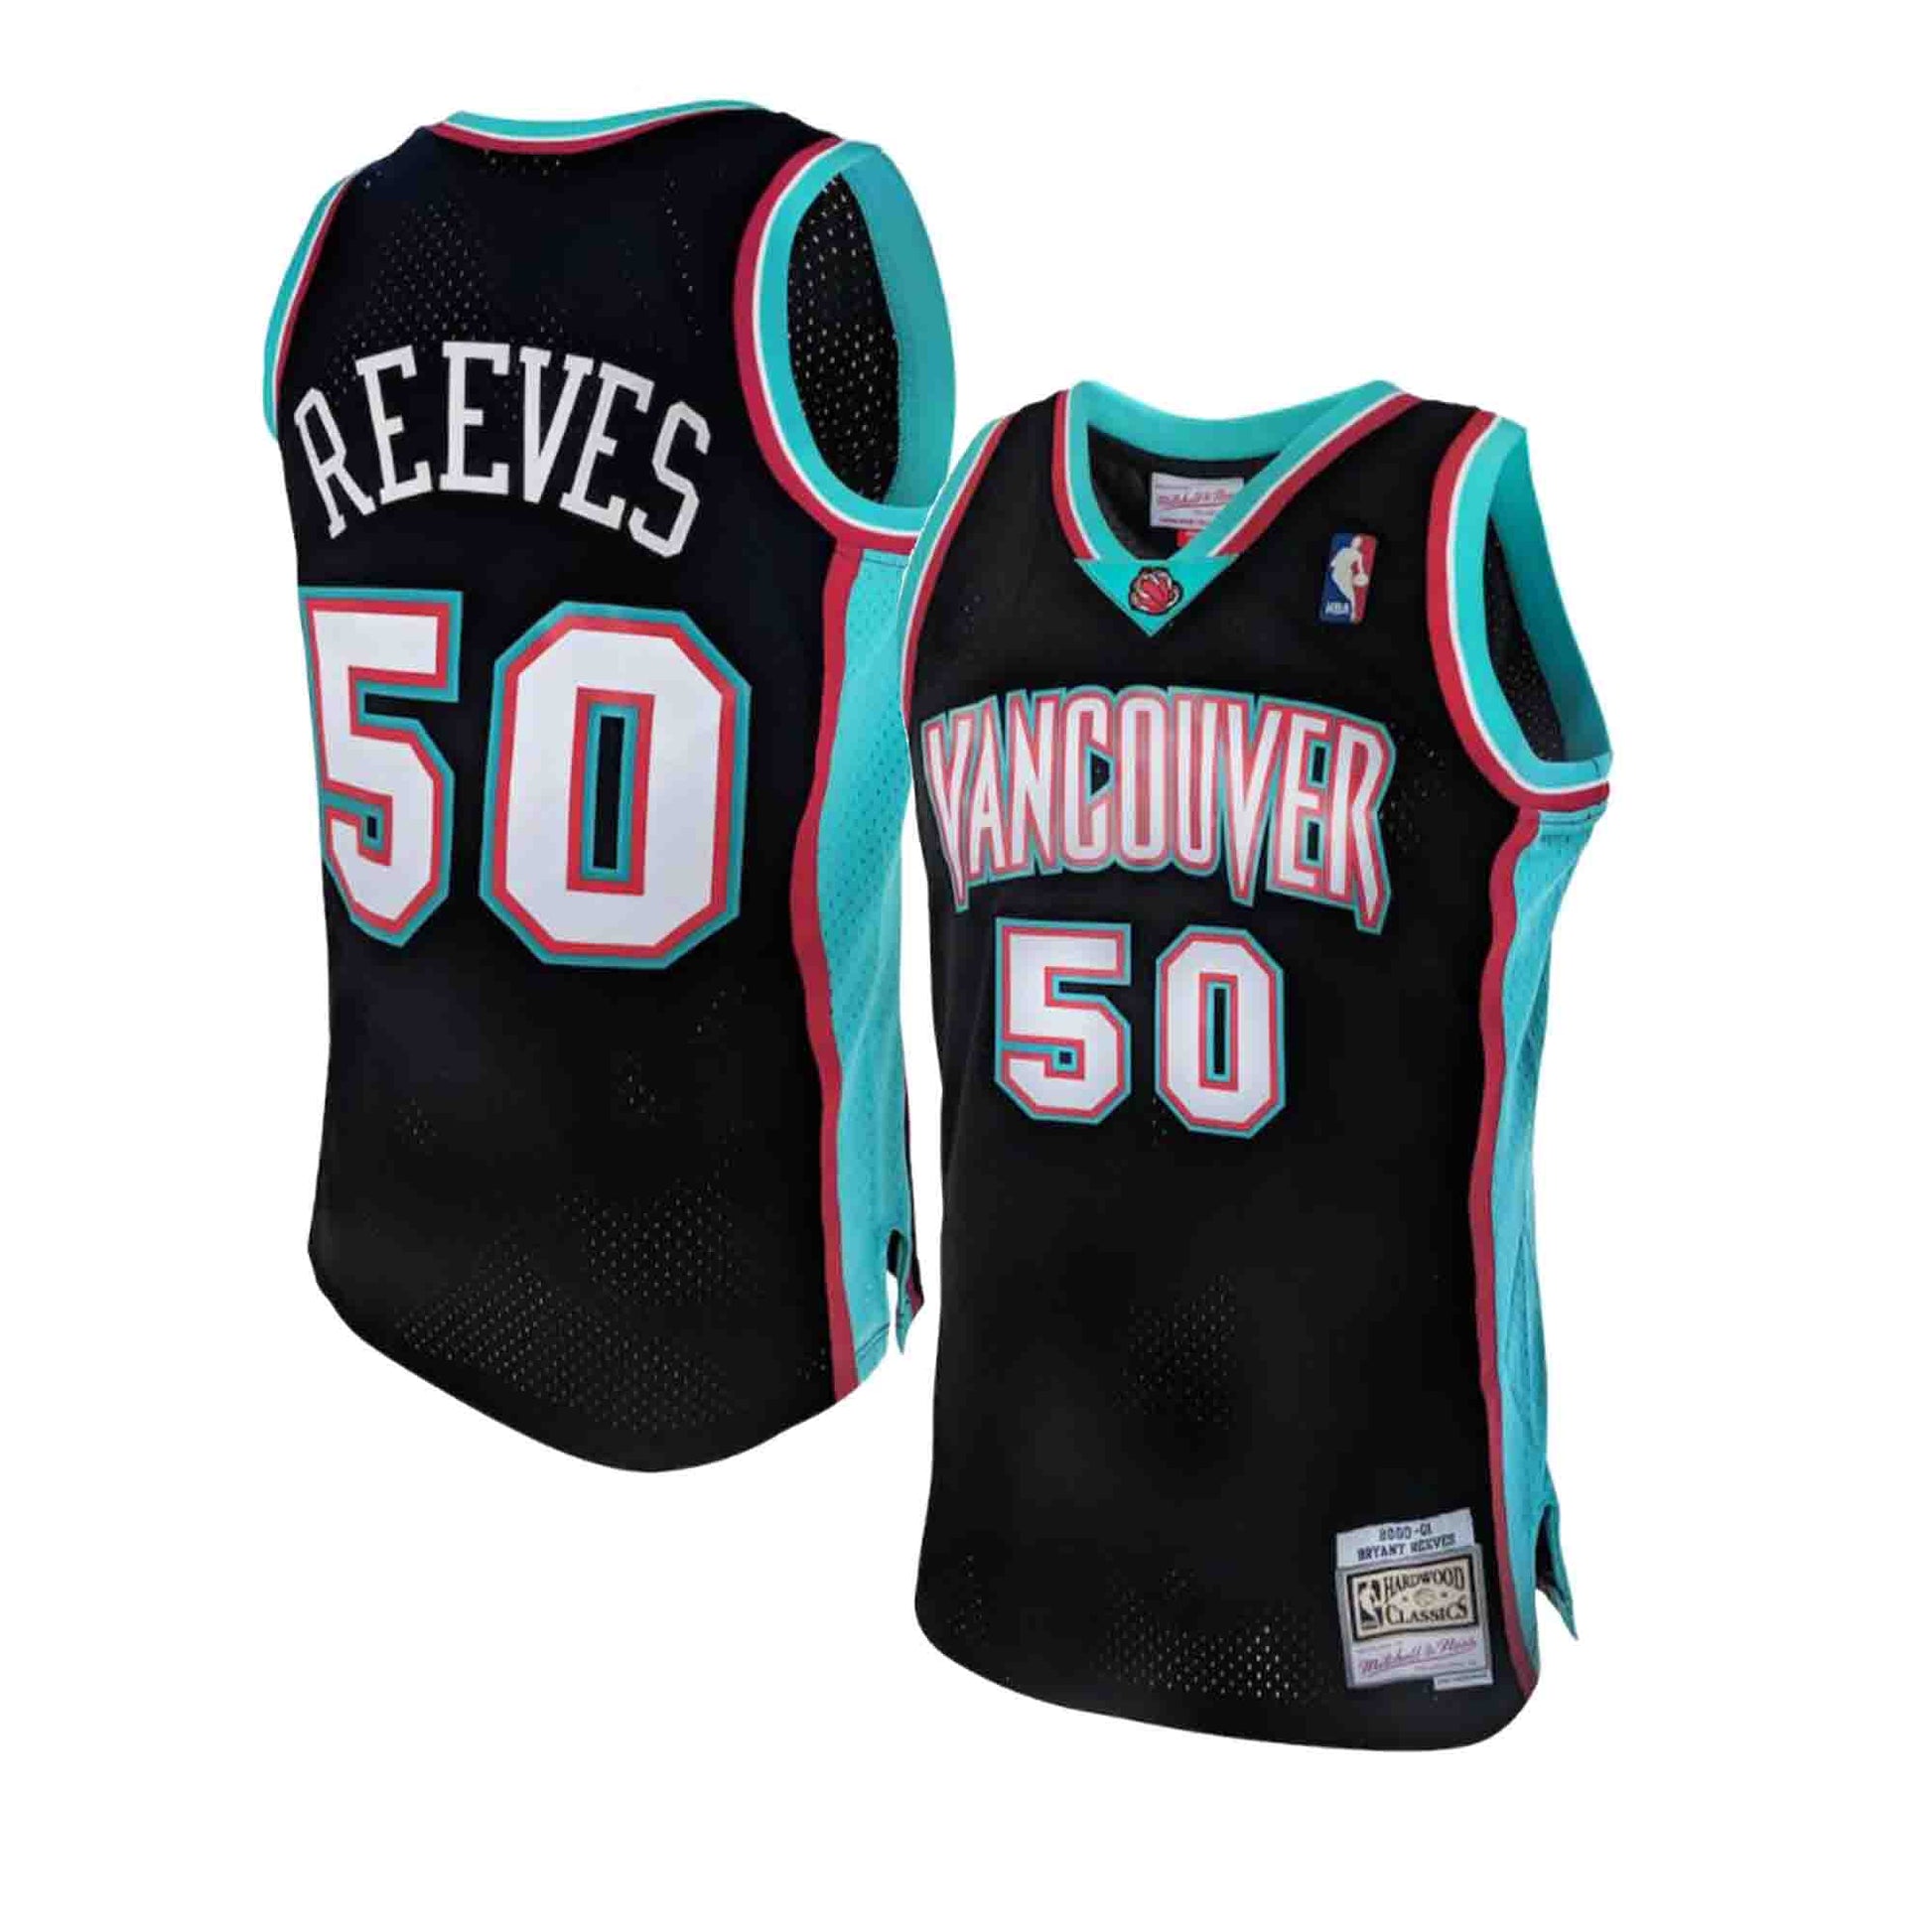 VINTAGE CHAMPION VANCOUVER GRIZZLIES BRYANT REEVES SIGNED JERSEY